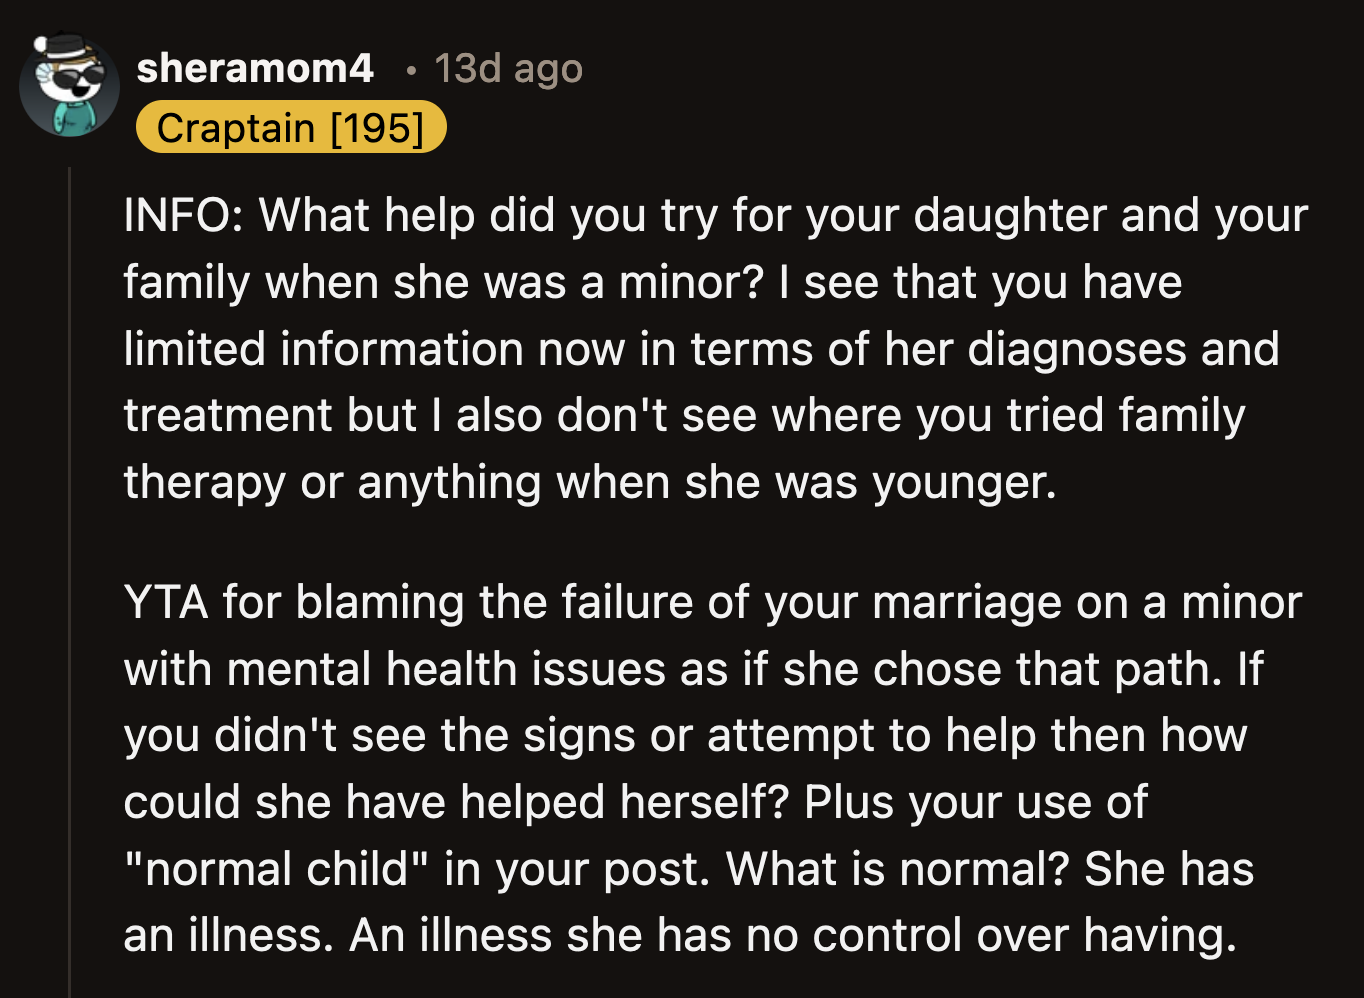 On top of being a terrible parent and person, he is also an ableist.